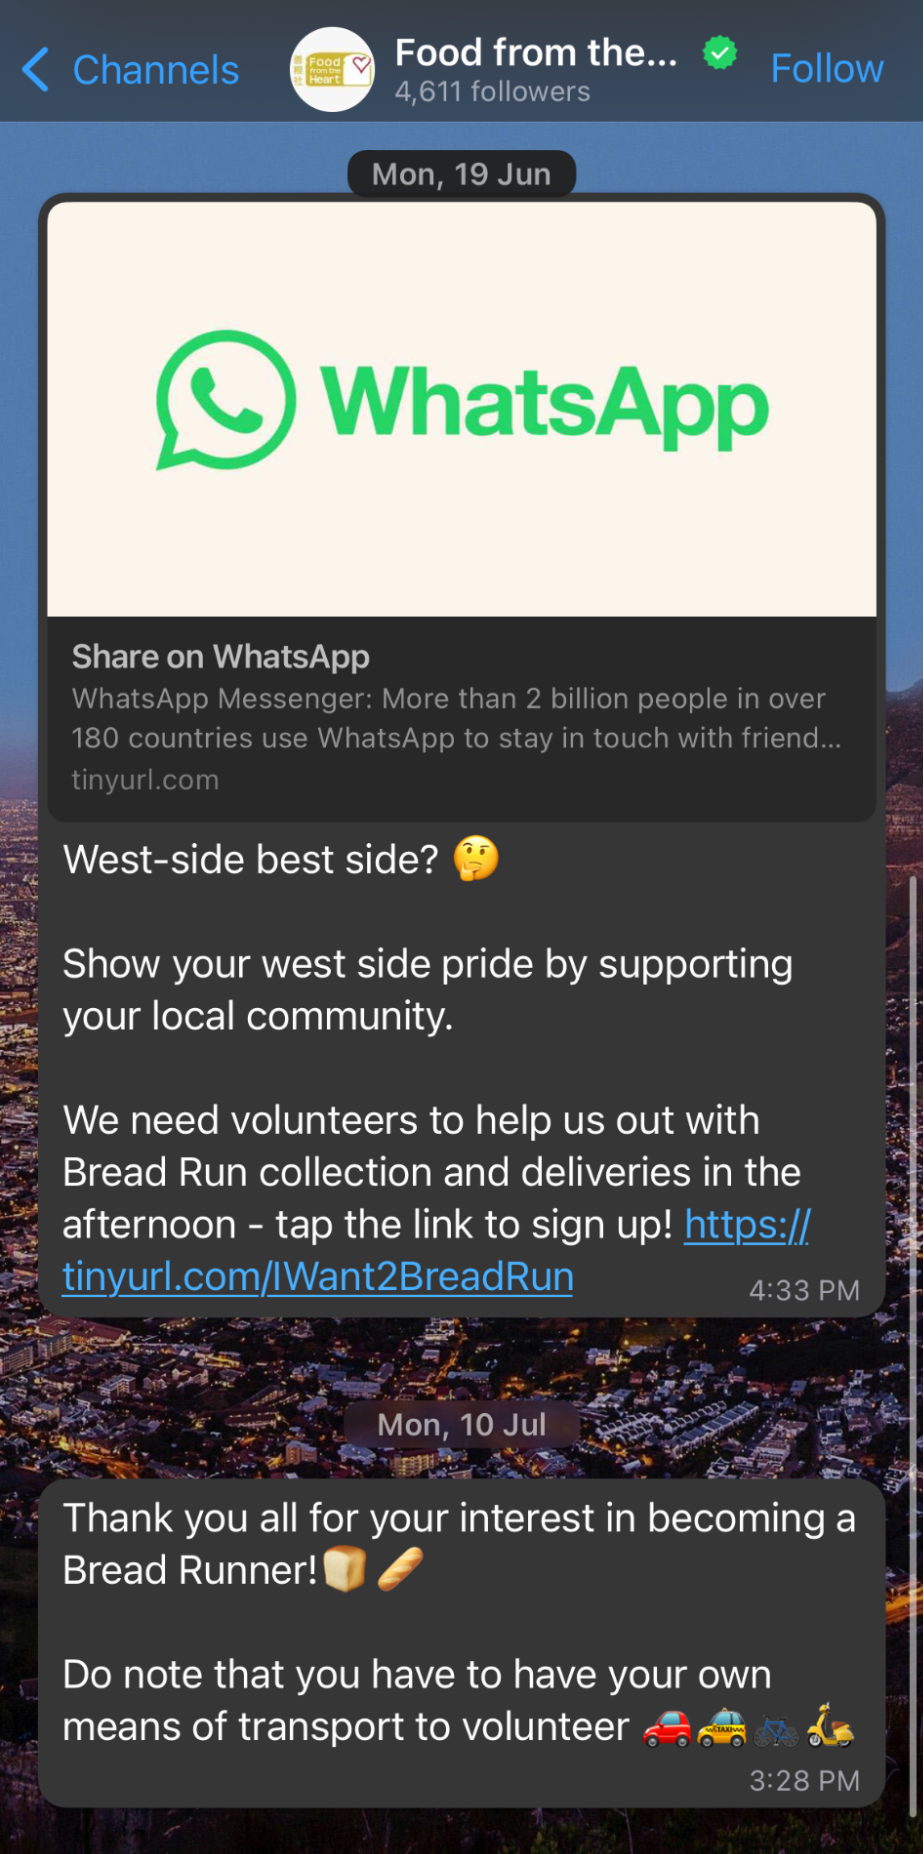 singapore whatsapp channels - sg food from the heart